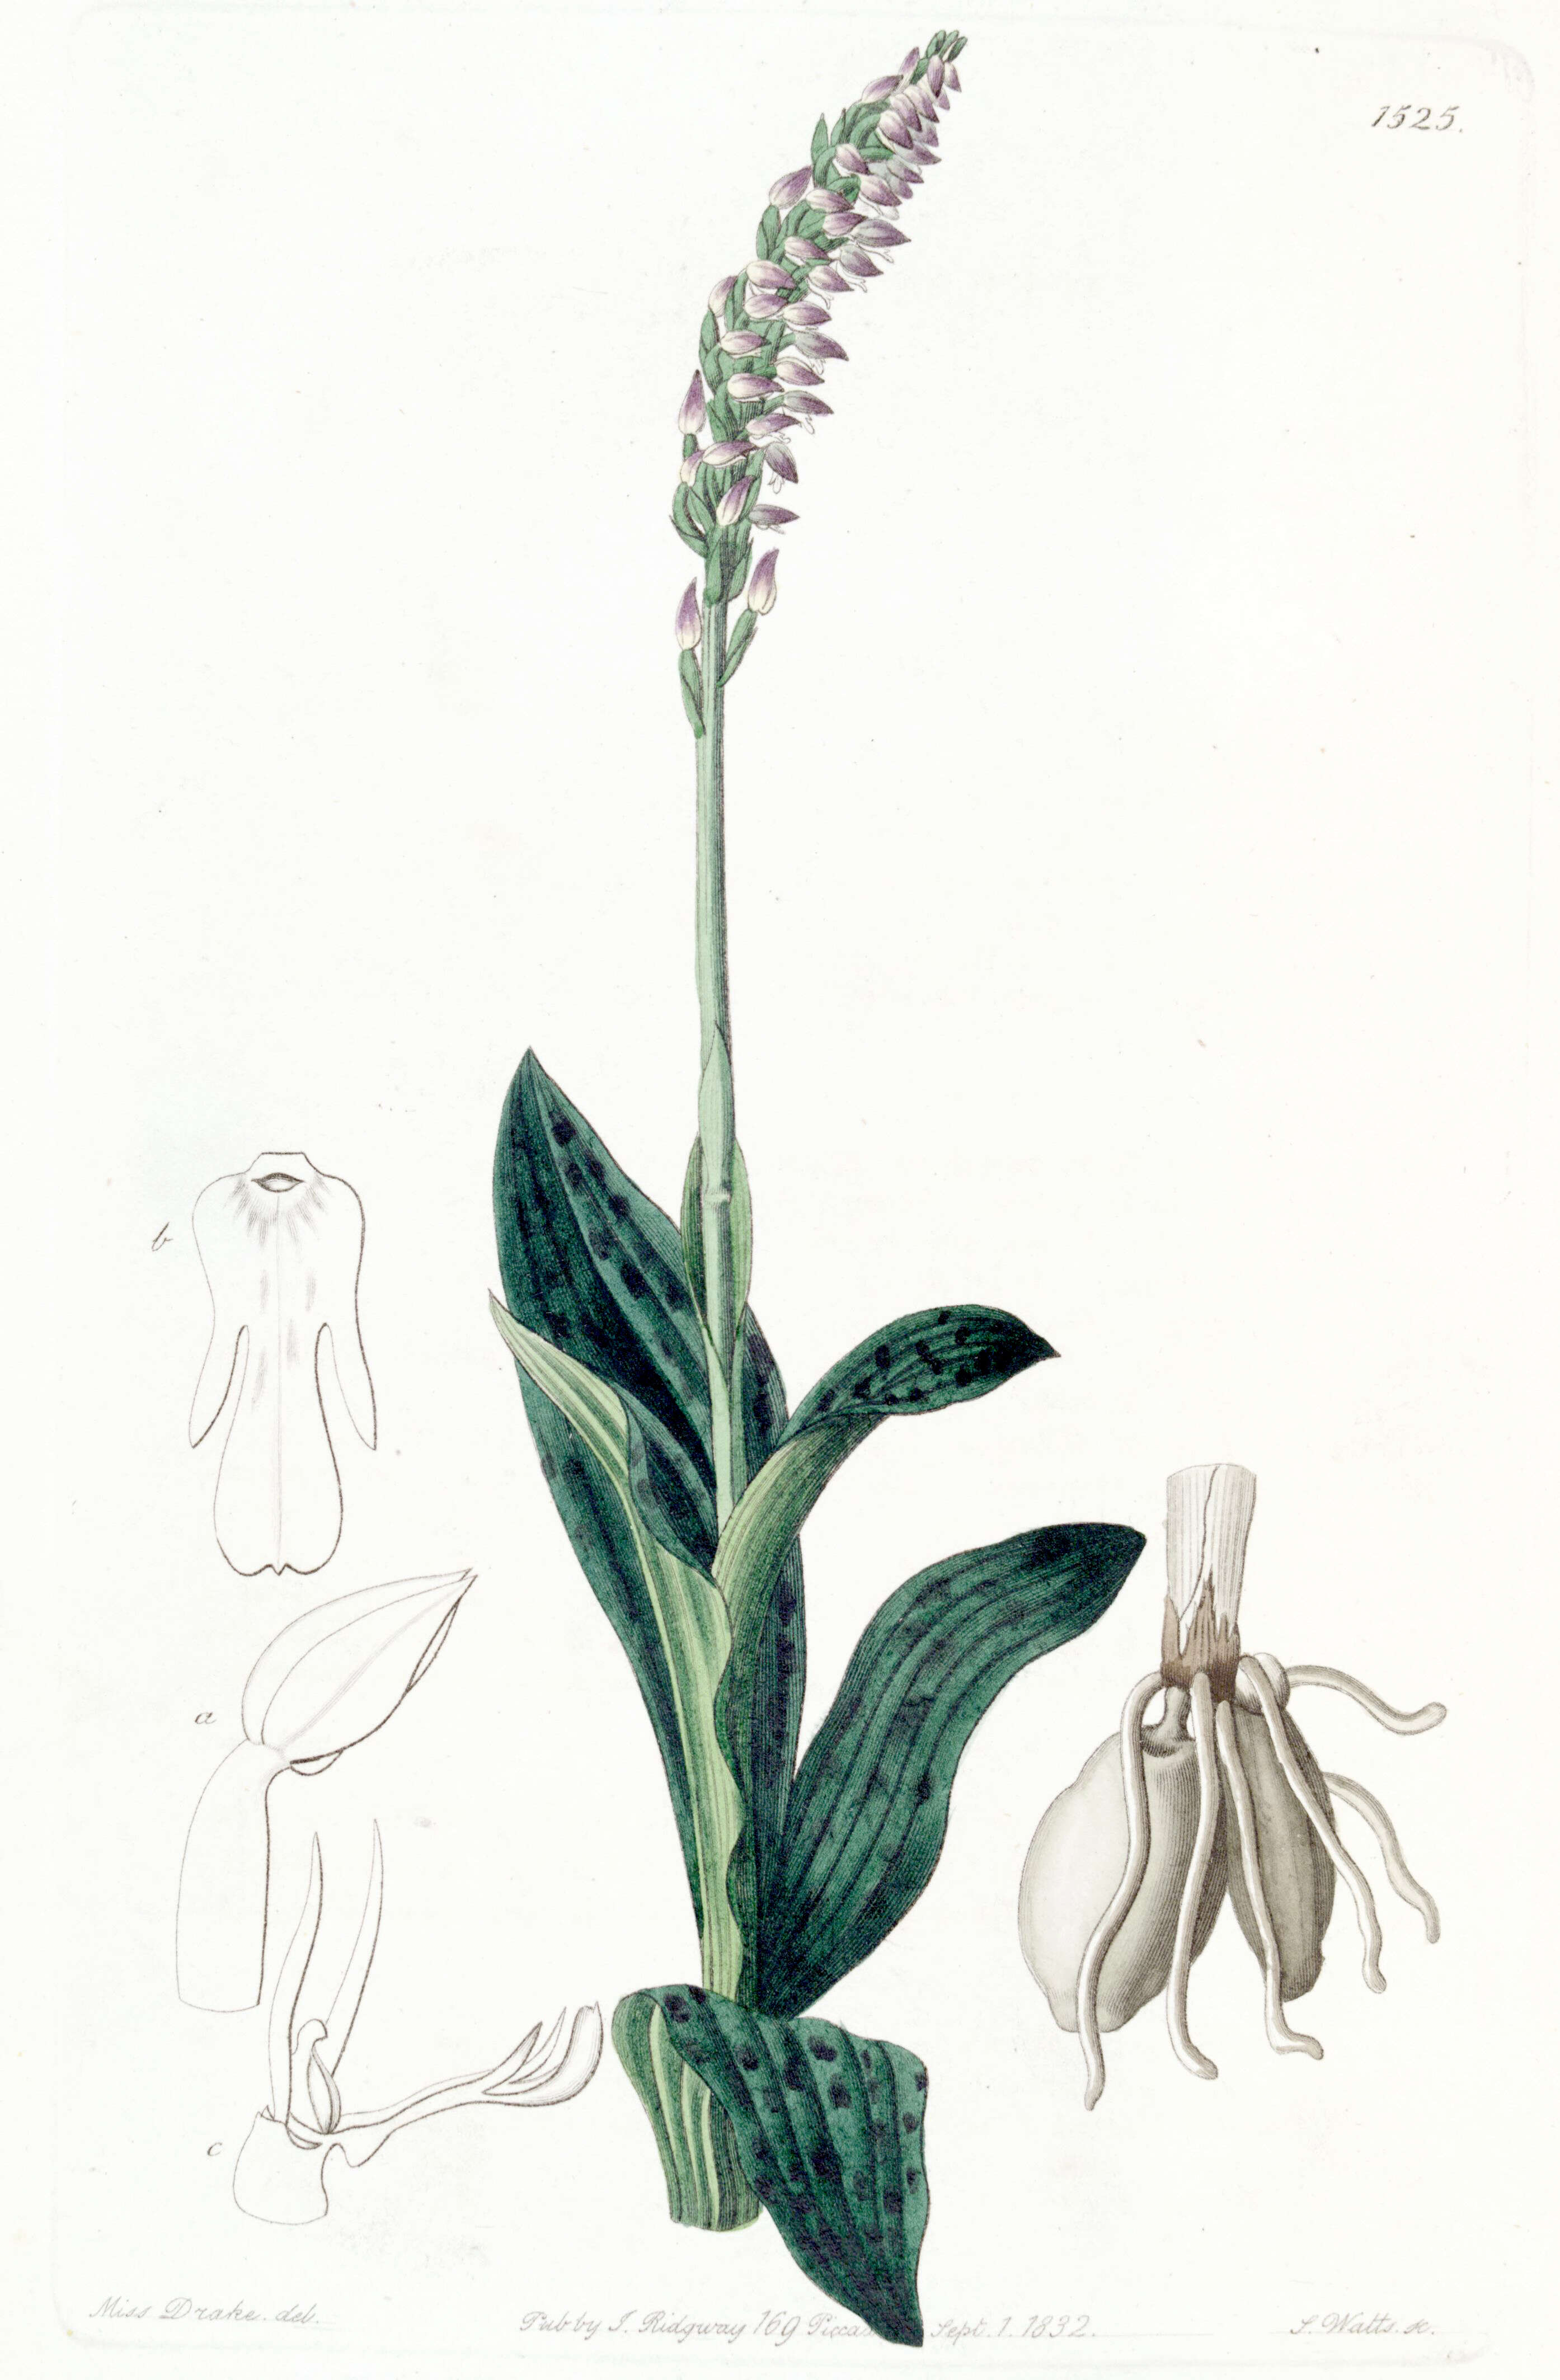 Image of Dense-flowered orchid